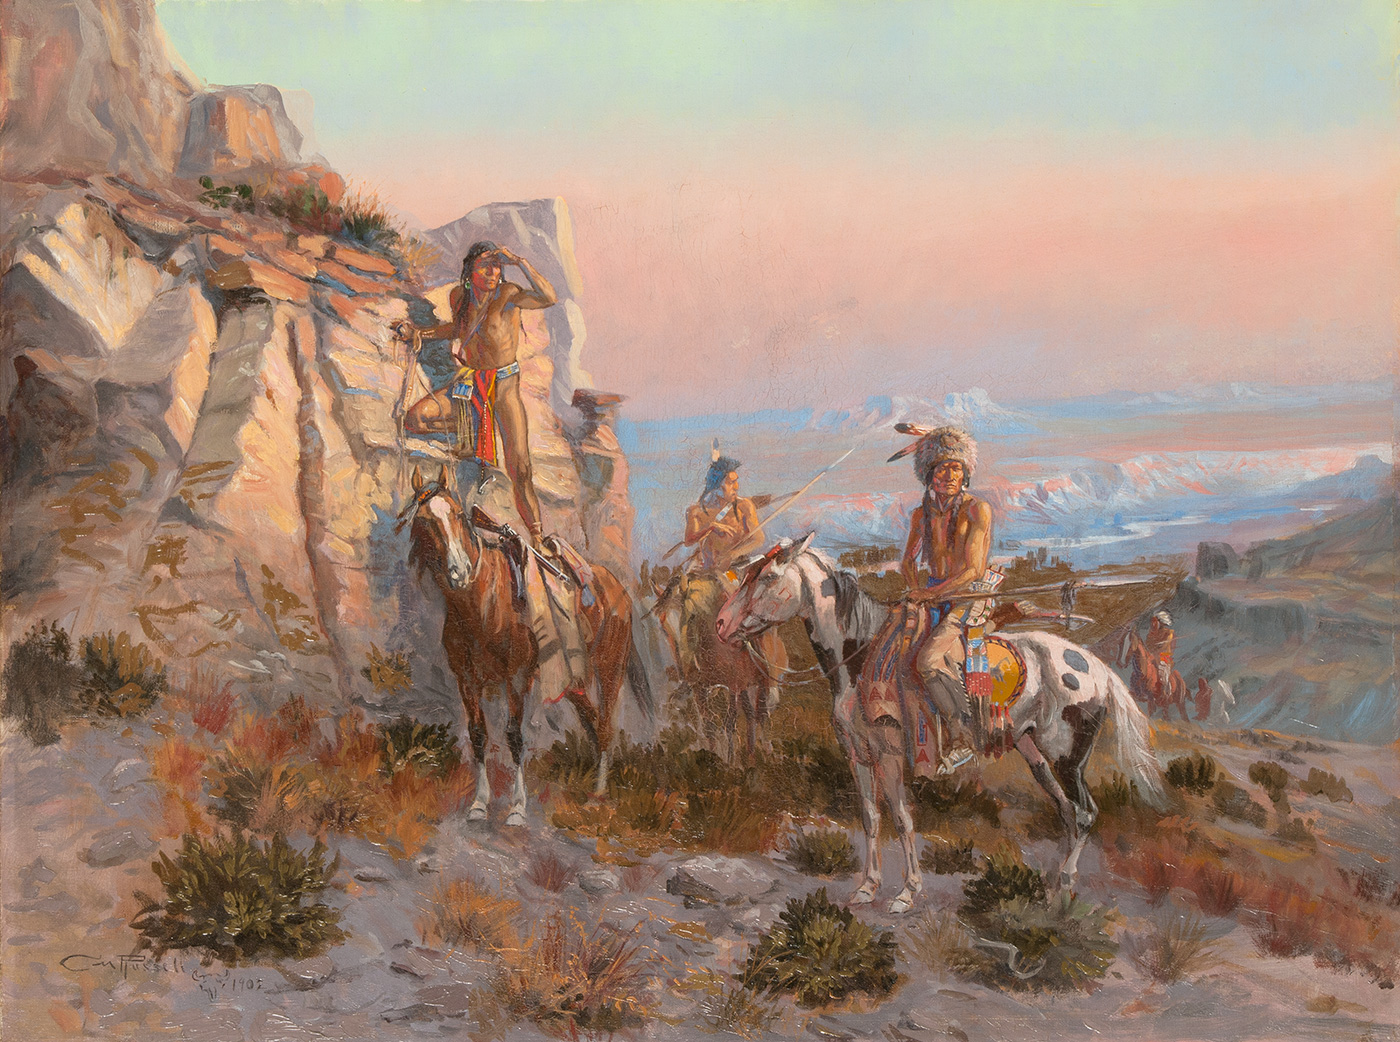 A small group of indigenous American men on horseback are stopped near a rocky outcrop looking out into the distance.